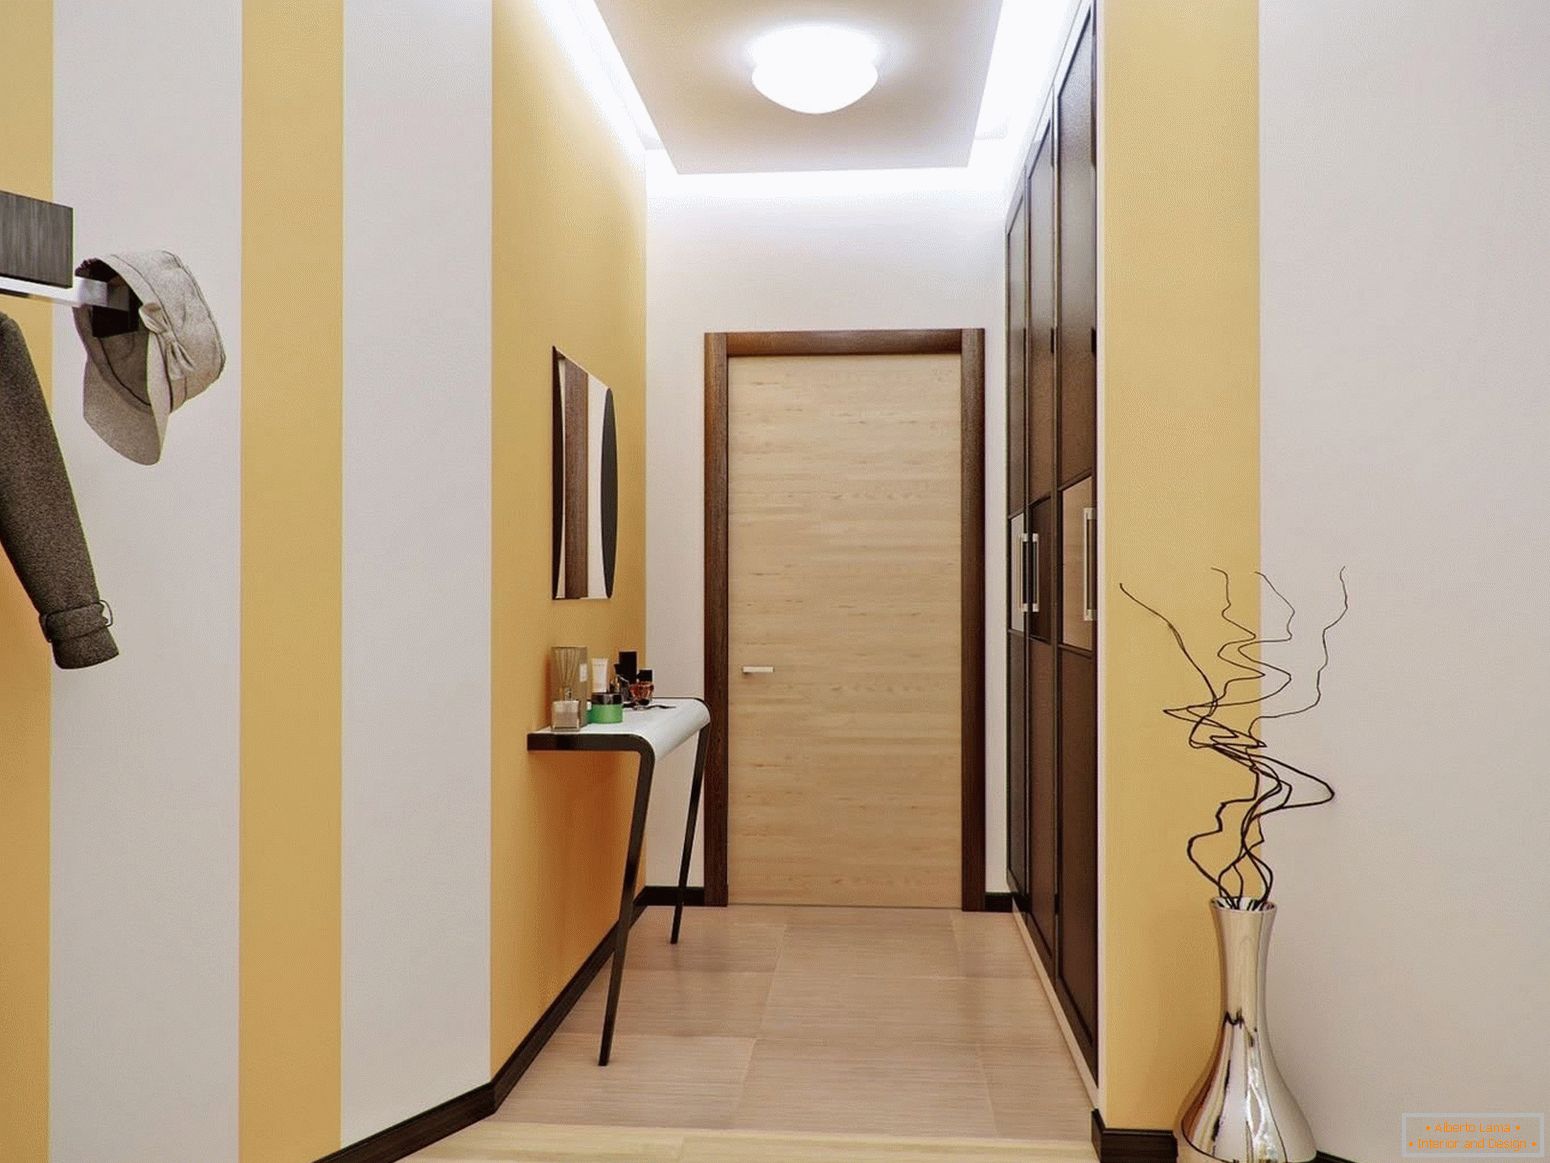 Yellow-white walls in the hallway